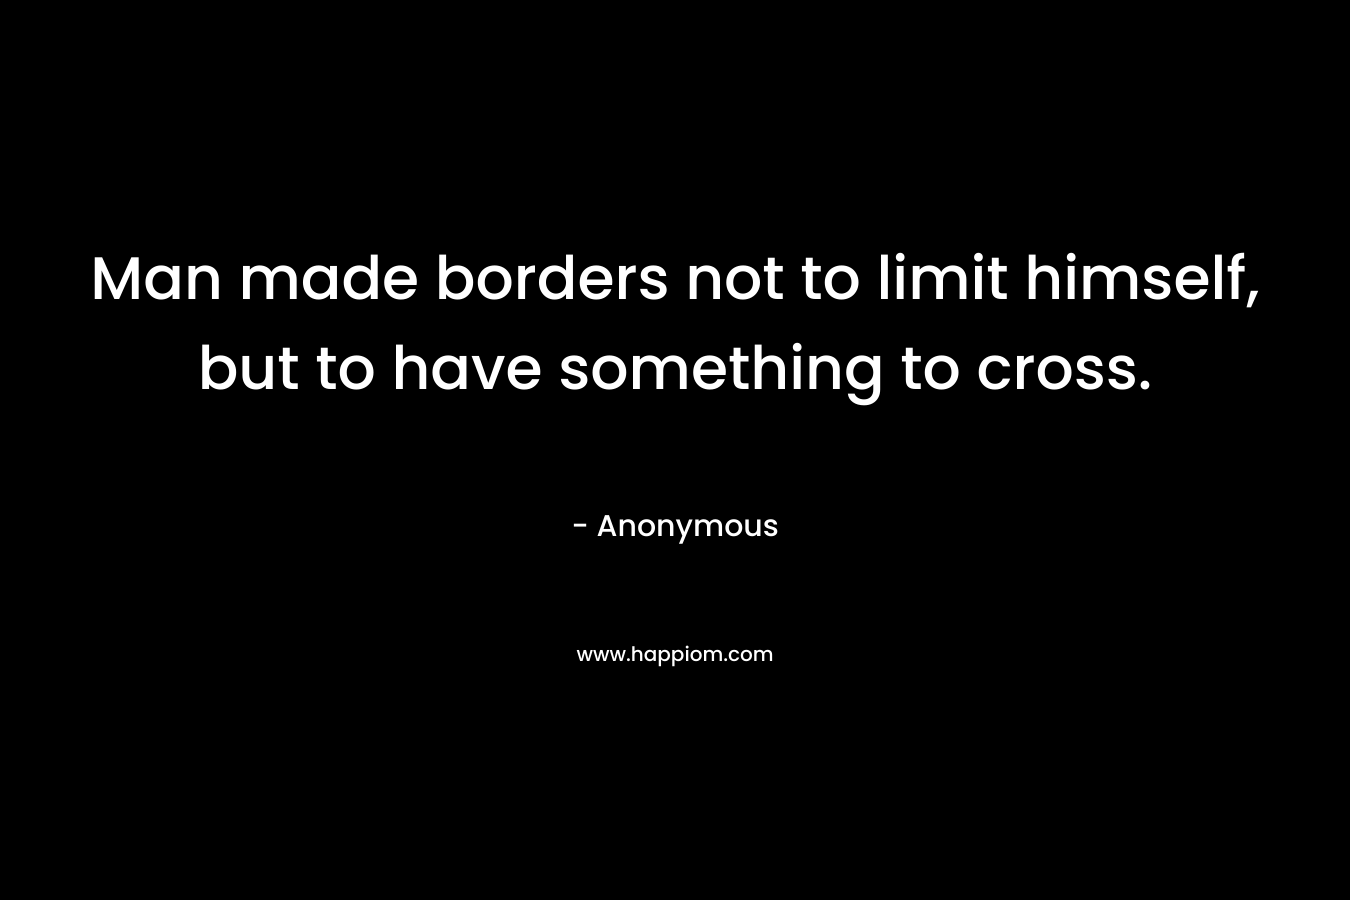 Man made borders not to limit himself, but to have something to cross. – Anonymous